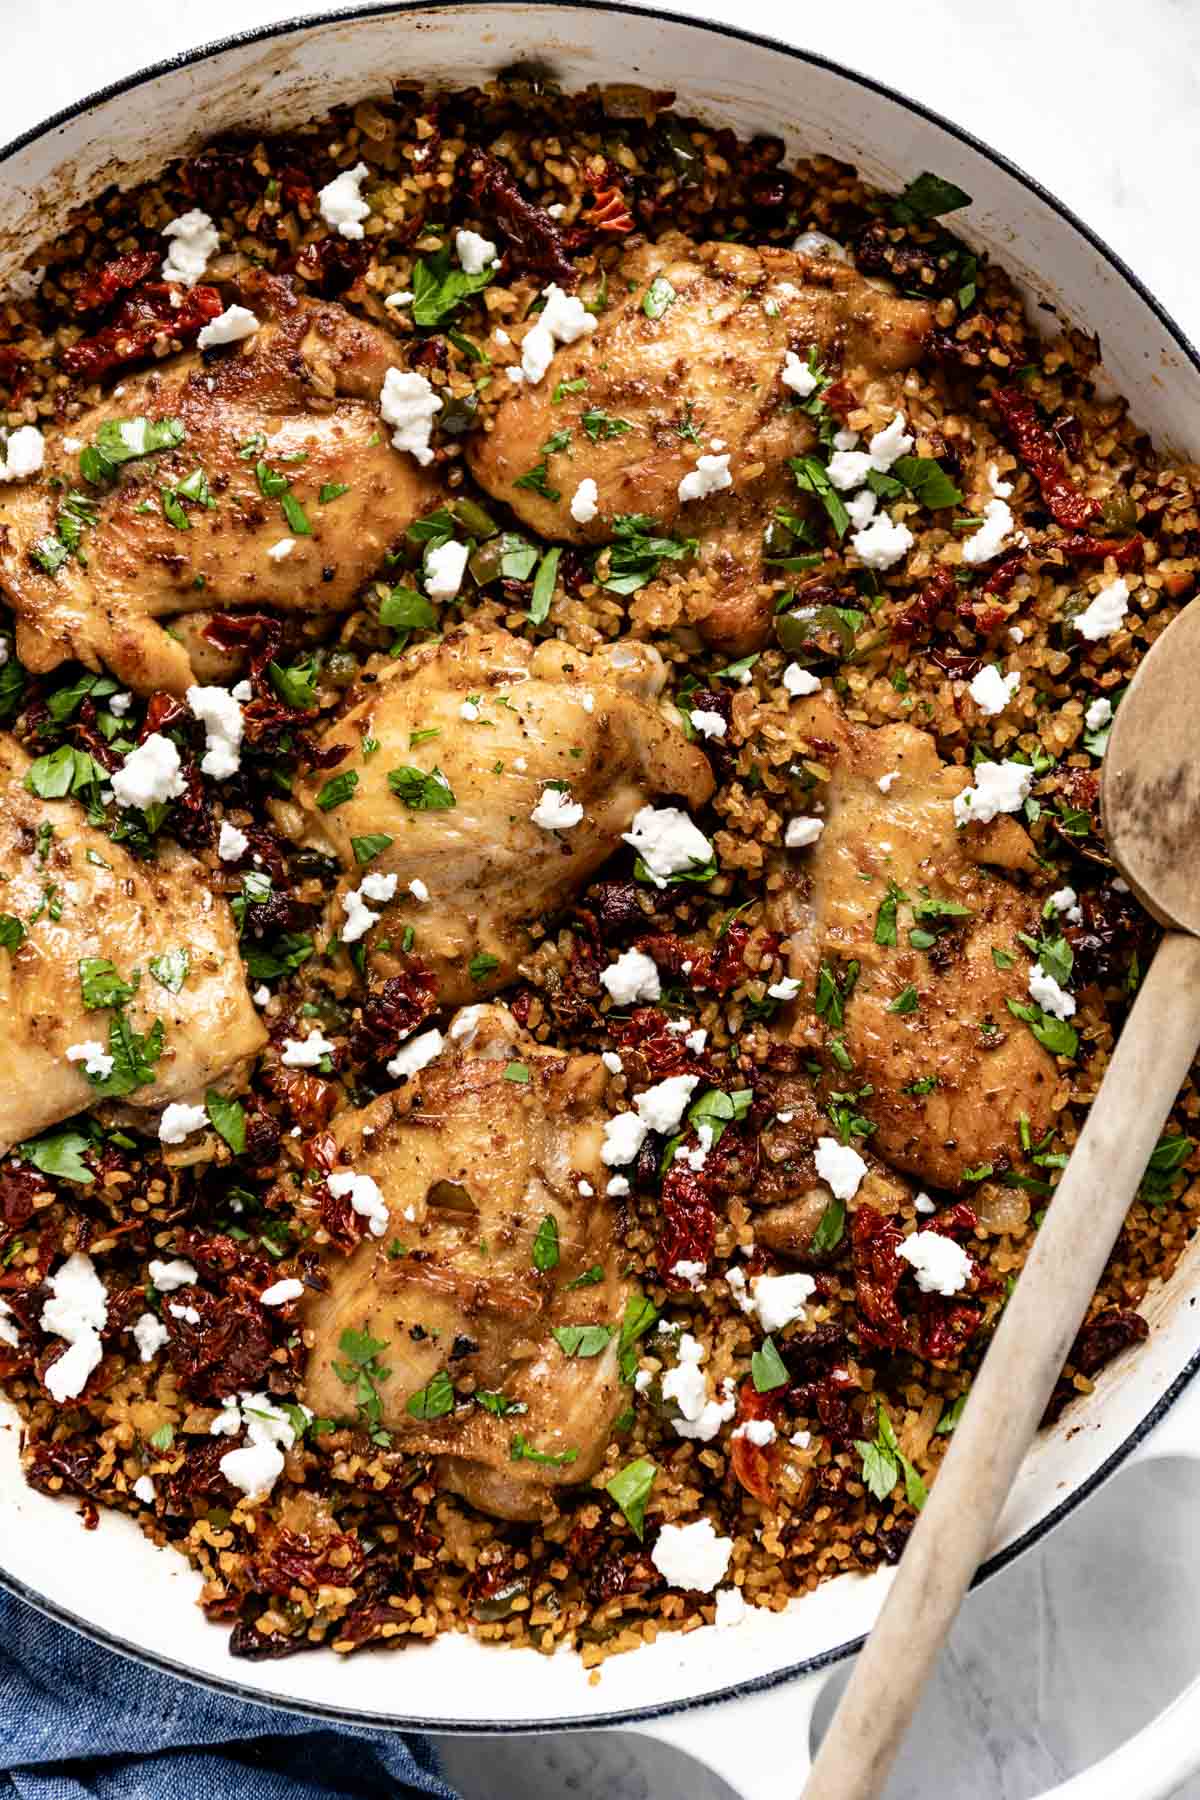 A chicken and grain dish topped with feta cheese from the top view.